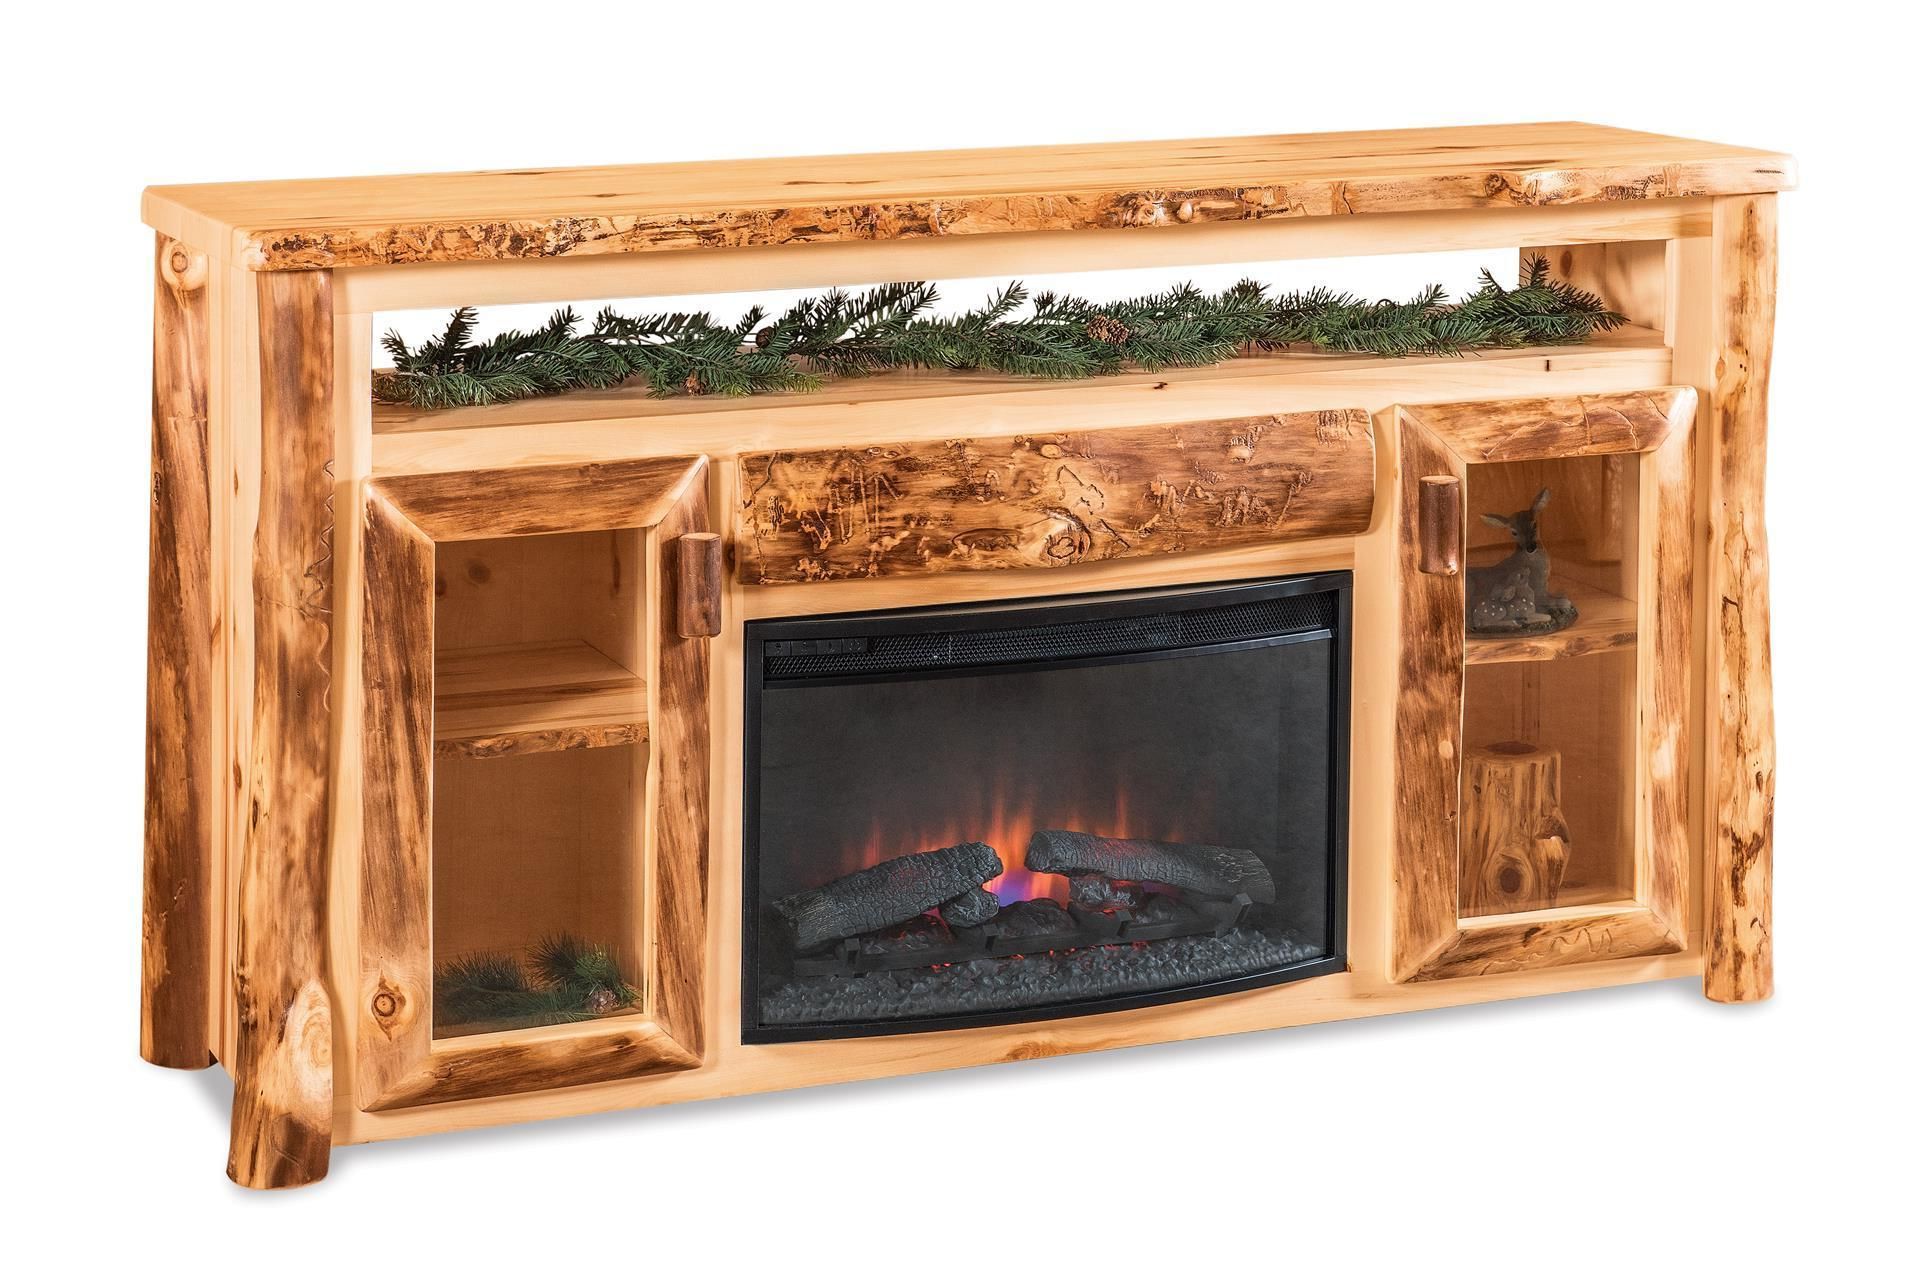 Rustic Log Tv Cabinet With Electric Fireplace From Dutchcrafters With Regard To Tv Stands With Electric Fireplace (Gallery 17 of 20)